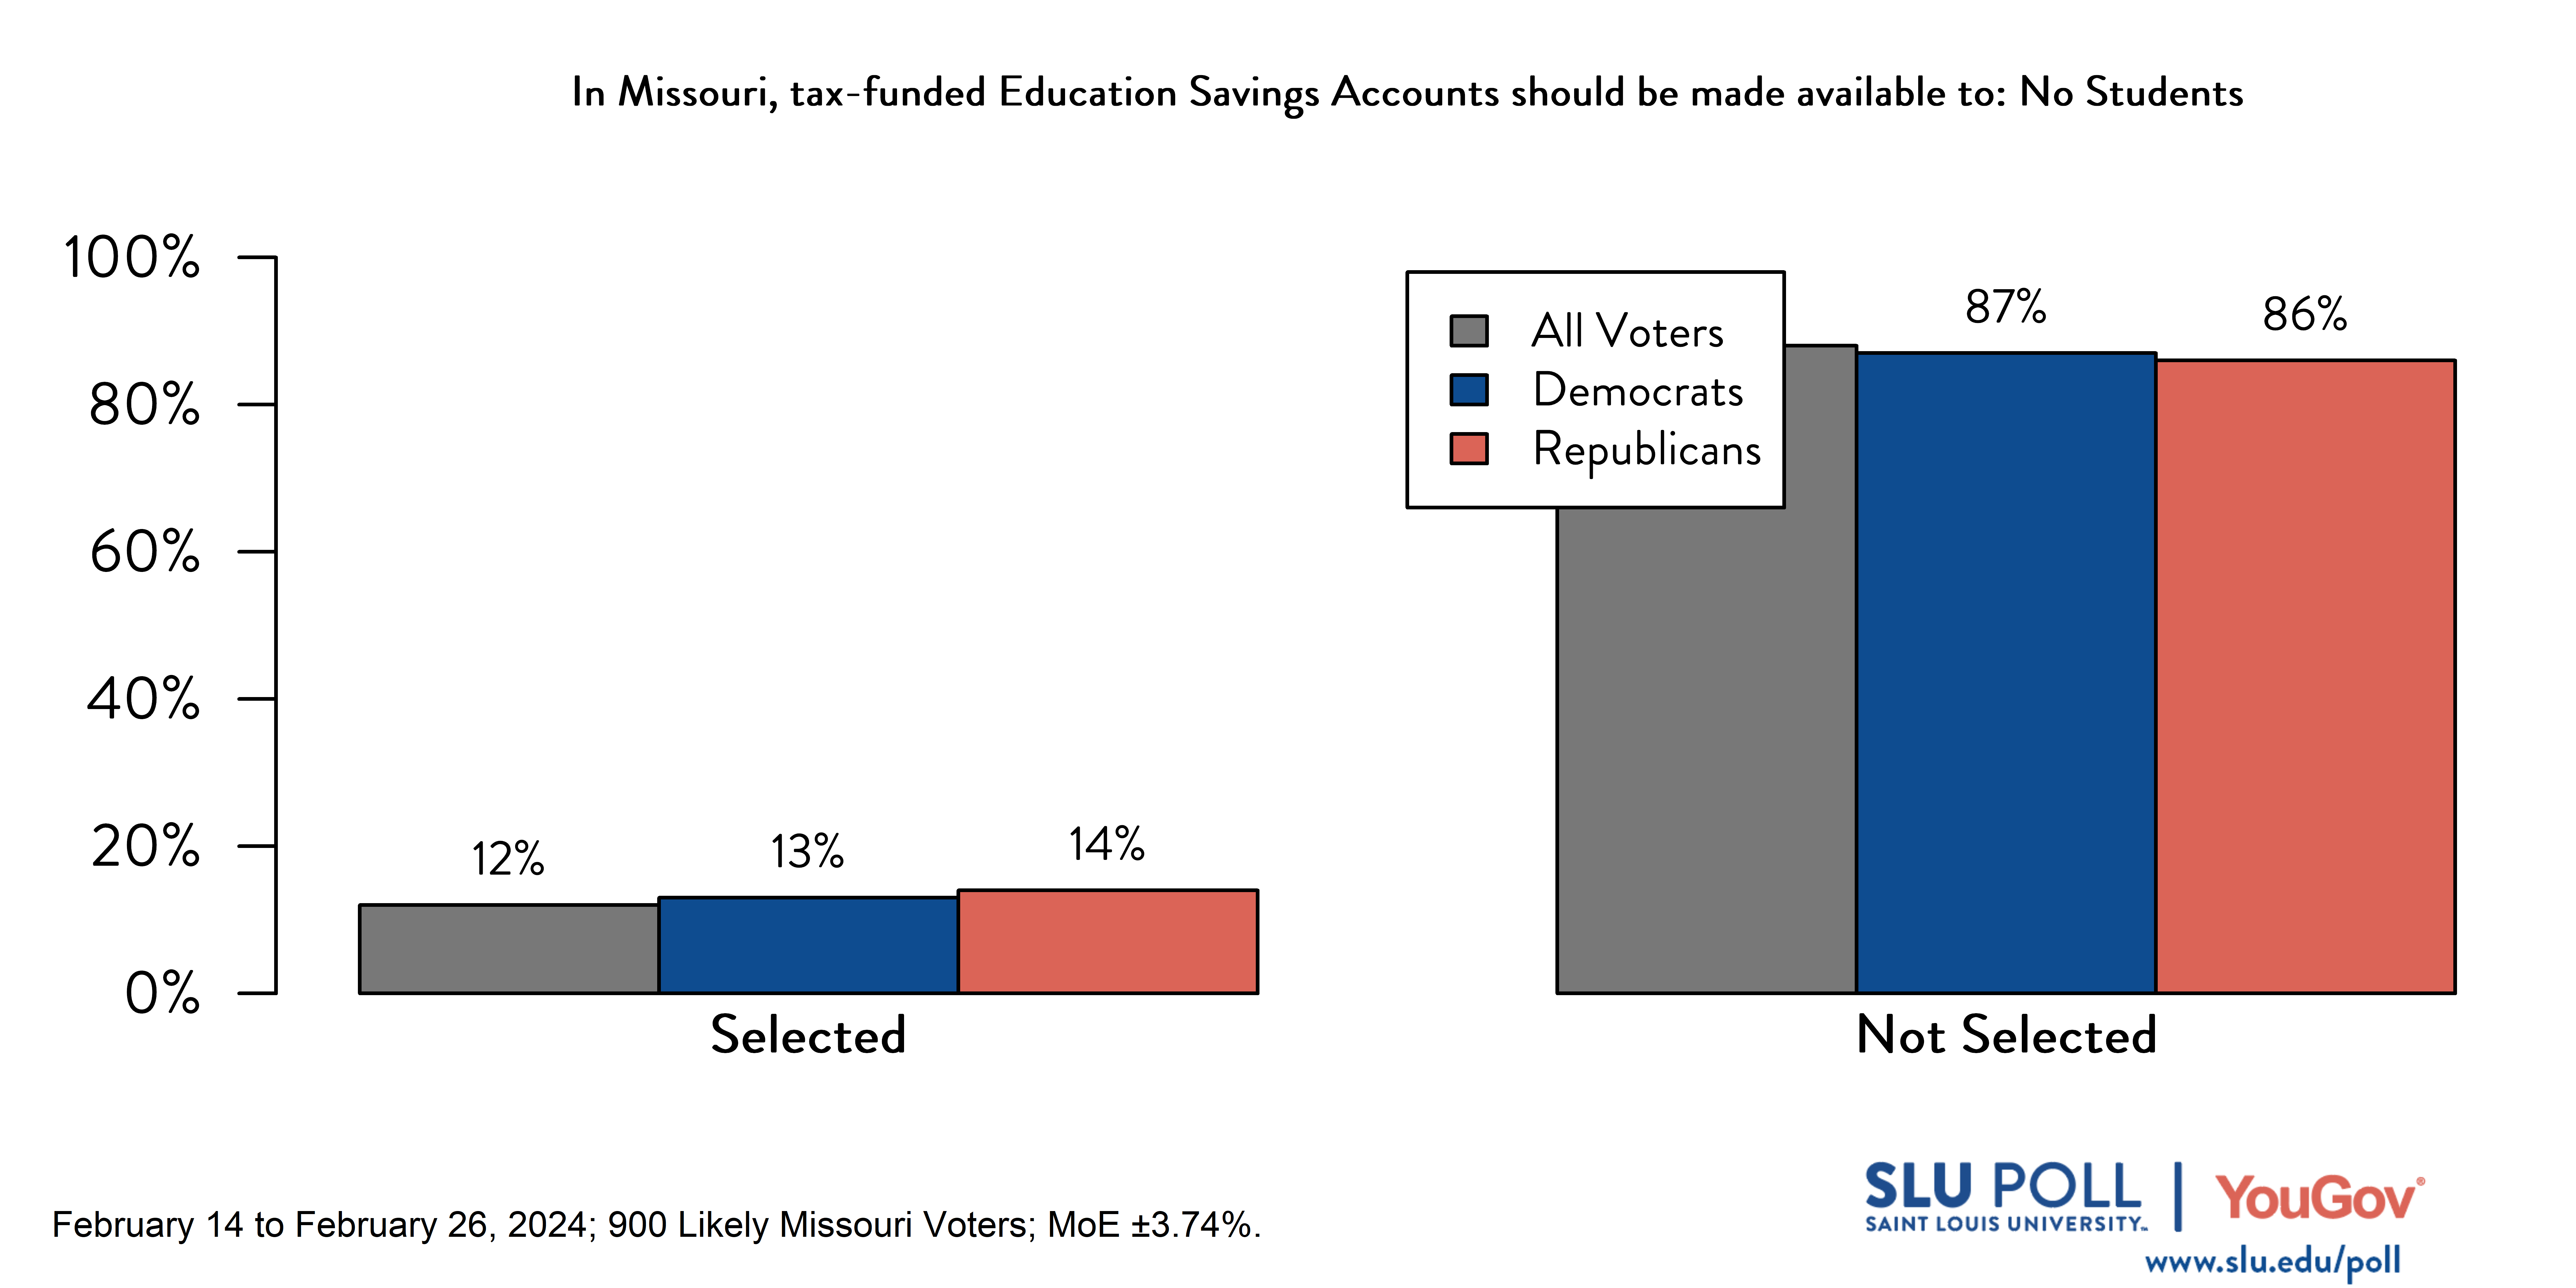 Likely voters' responses to 'In Missouri, tax-funded Education Savings Accounts should be made available to: No one': 12% selected, and 88% not selected. Democratic voters' responses: ' 13% selected, and 87% not selected. Republican voters' responses:  14% selected, and 86% not selected.